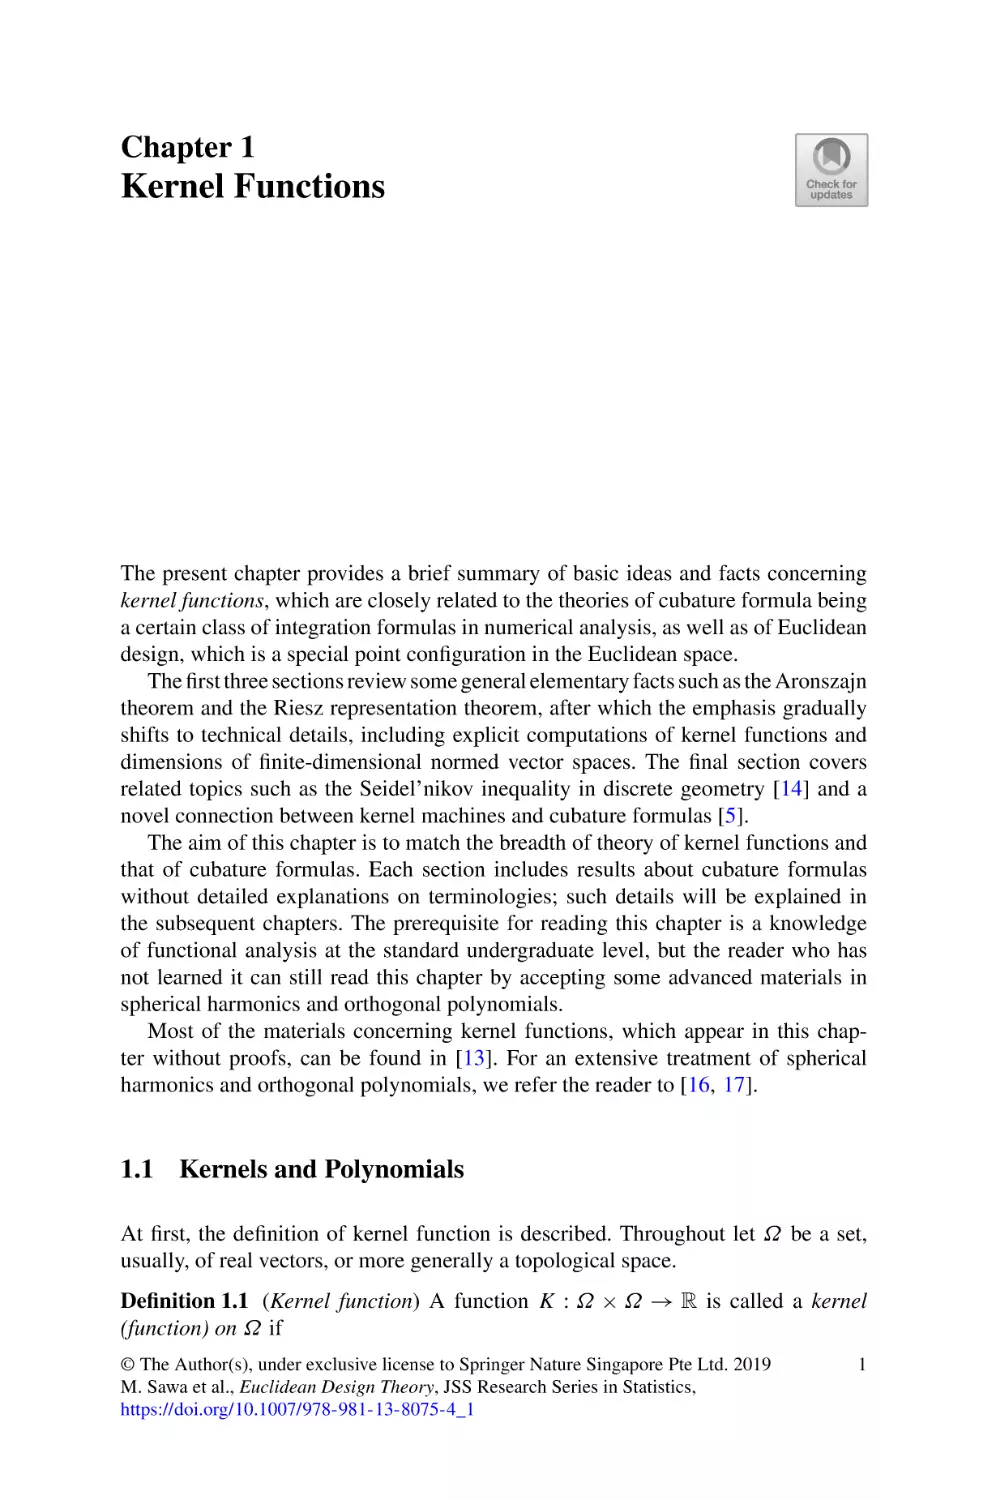 1 Kernel Functions
1.1 Kernels and Polynomials